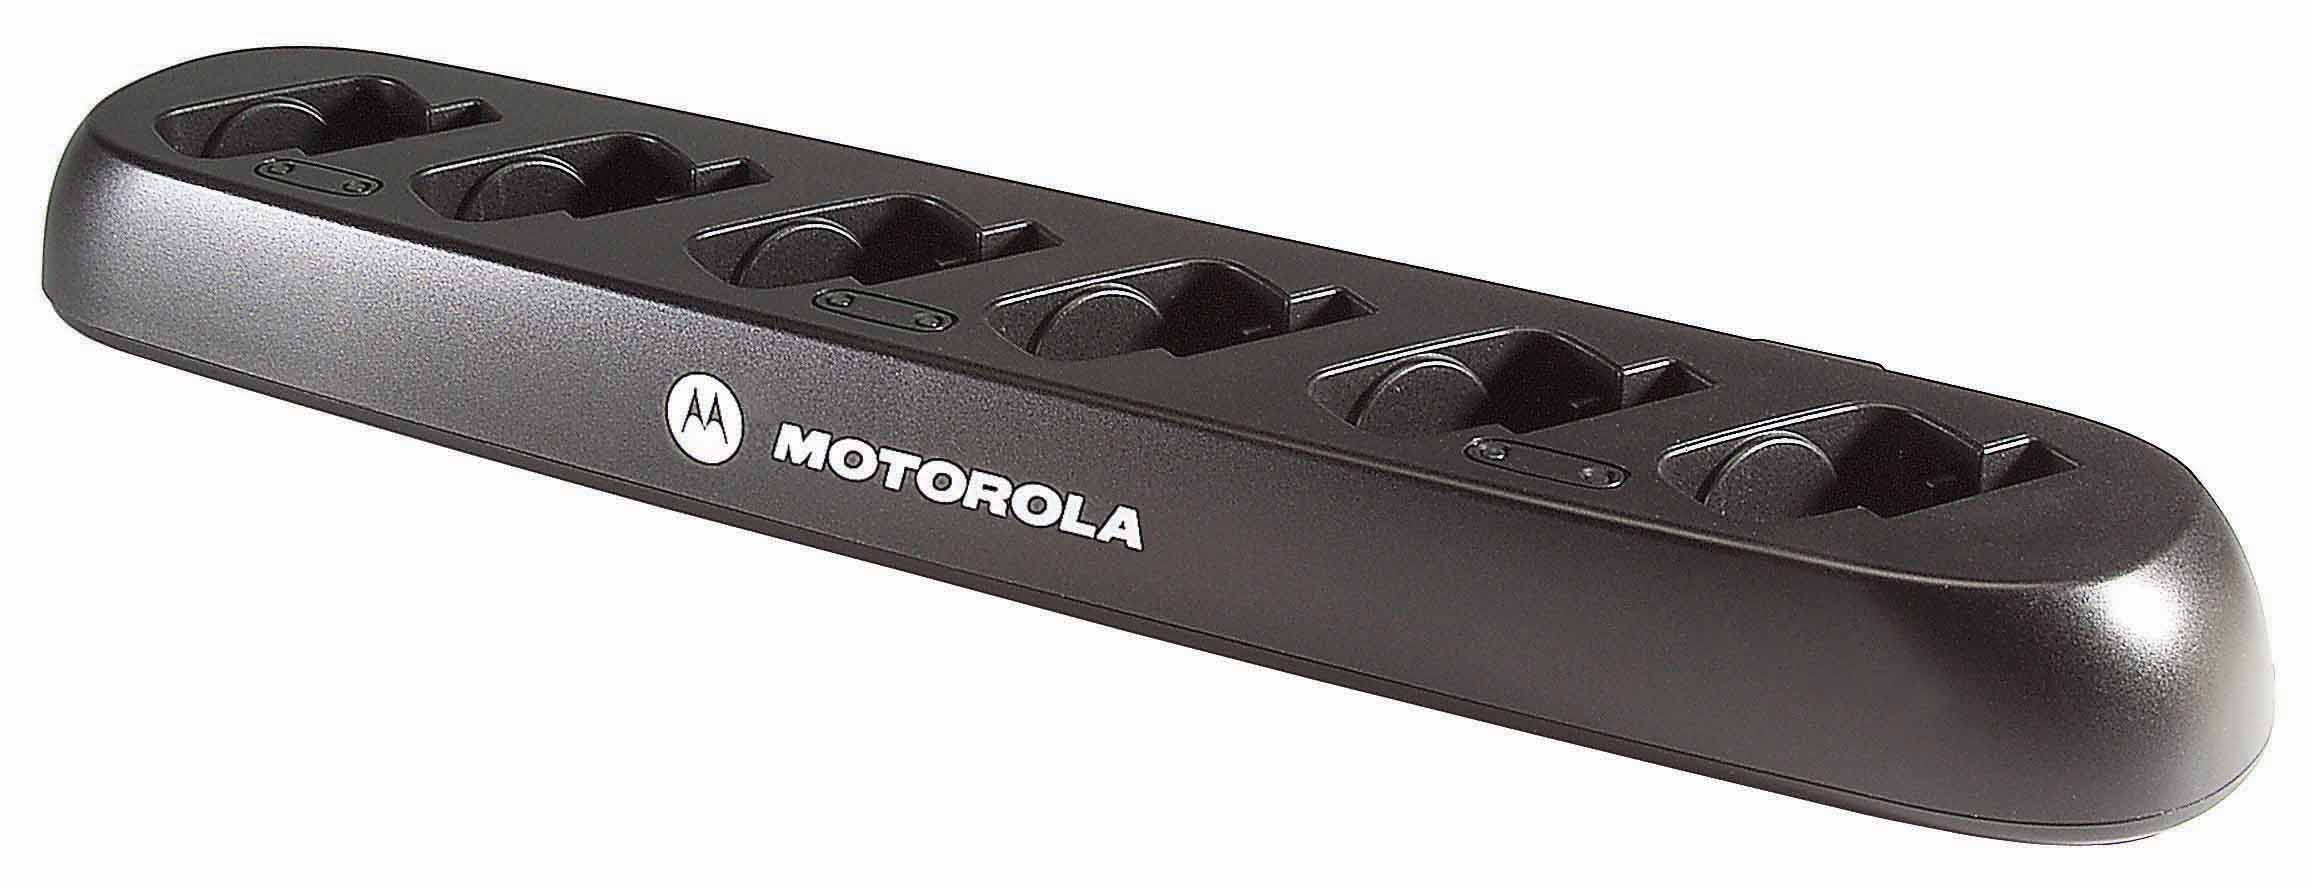 CLS Series Multi Unit Charger/Cloning Station-Motorola